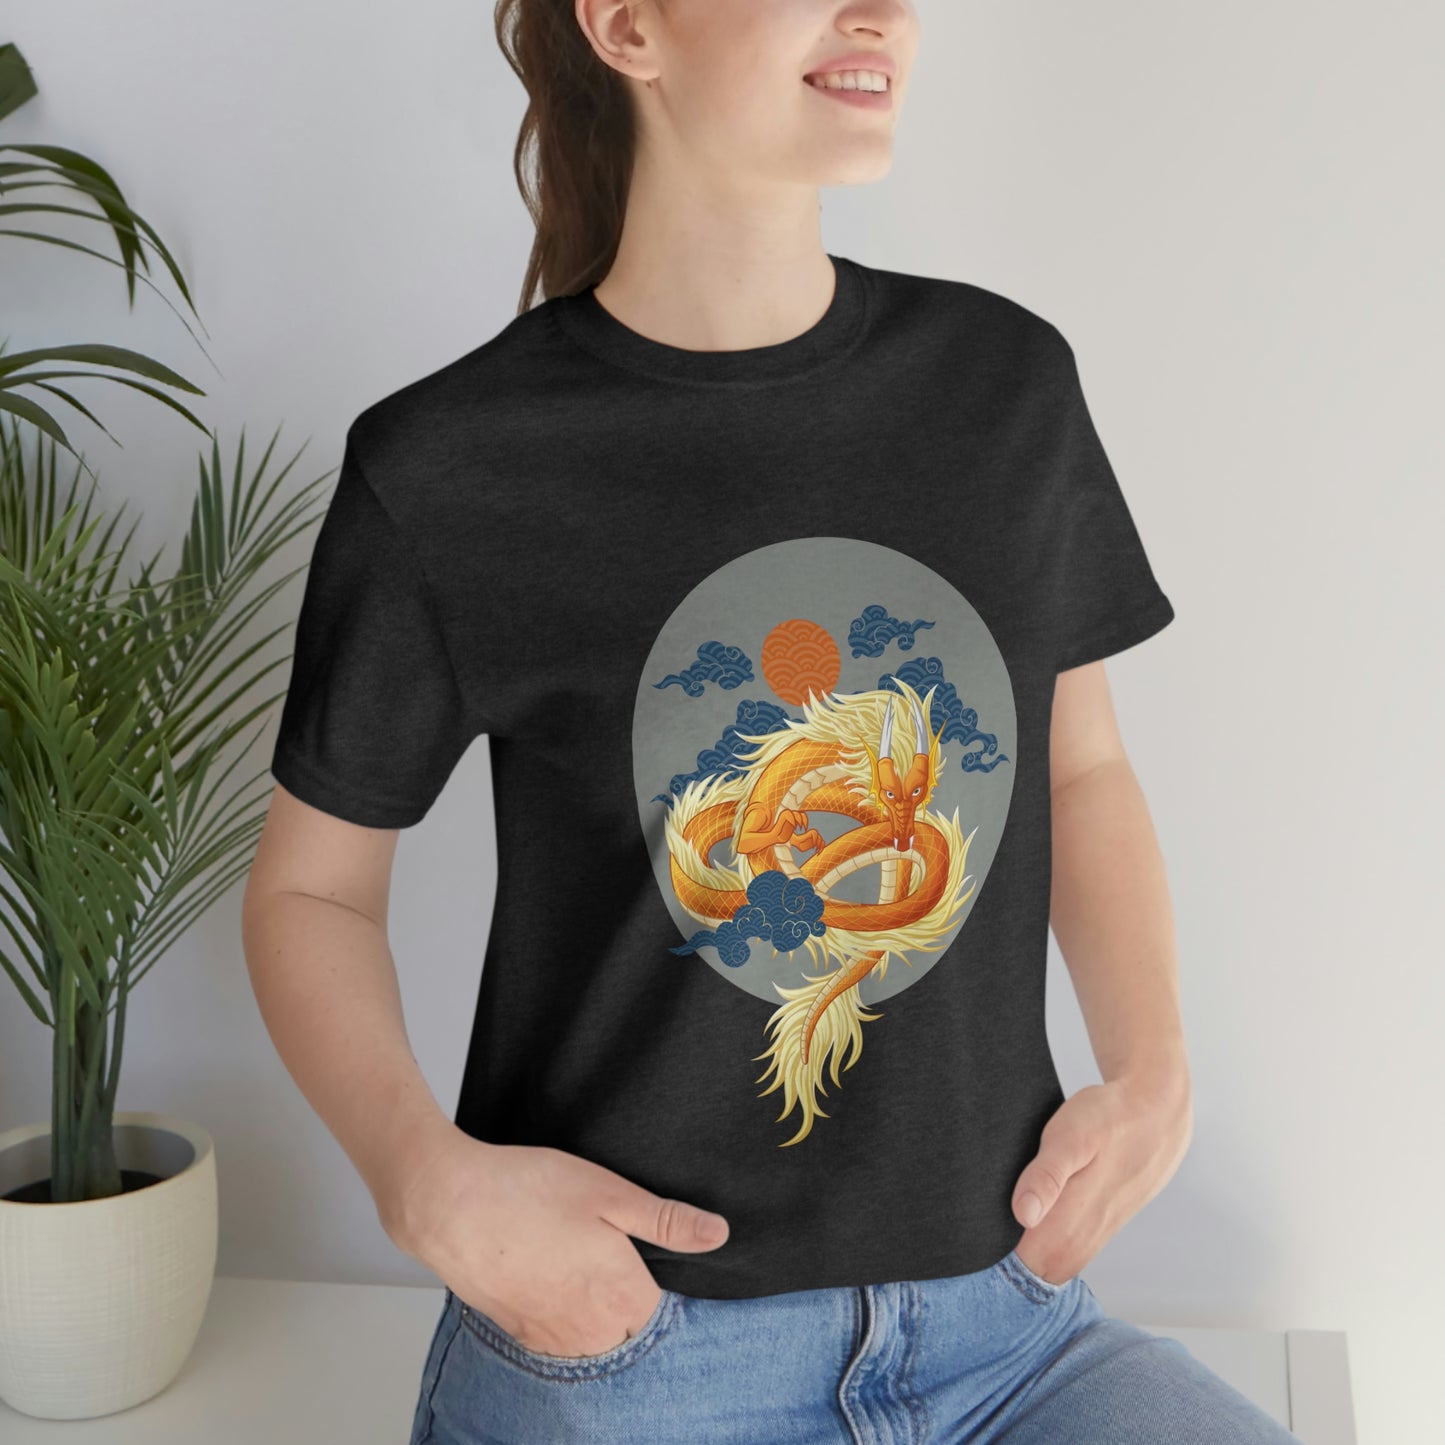 "Dragon's Fury" - Unisex Jersey Short Sleeve Tee Featuring an Exquisite Chinese Dragon Design.